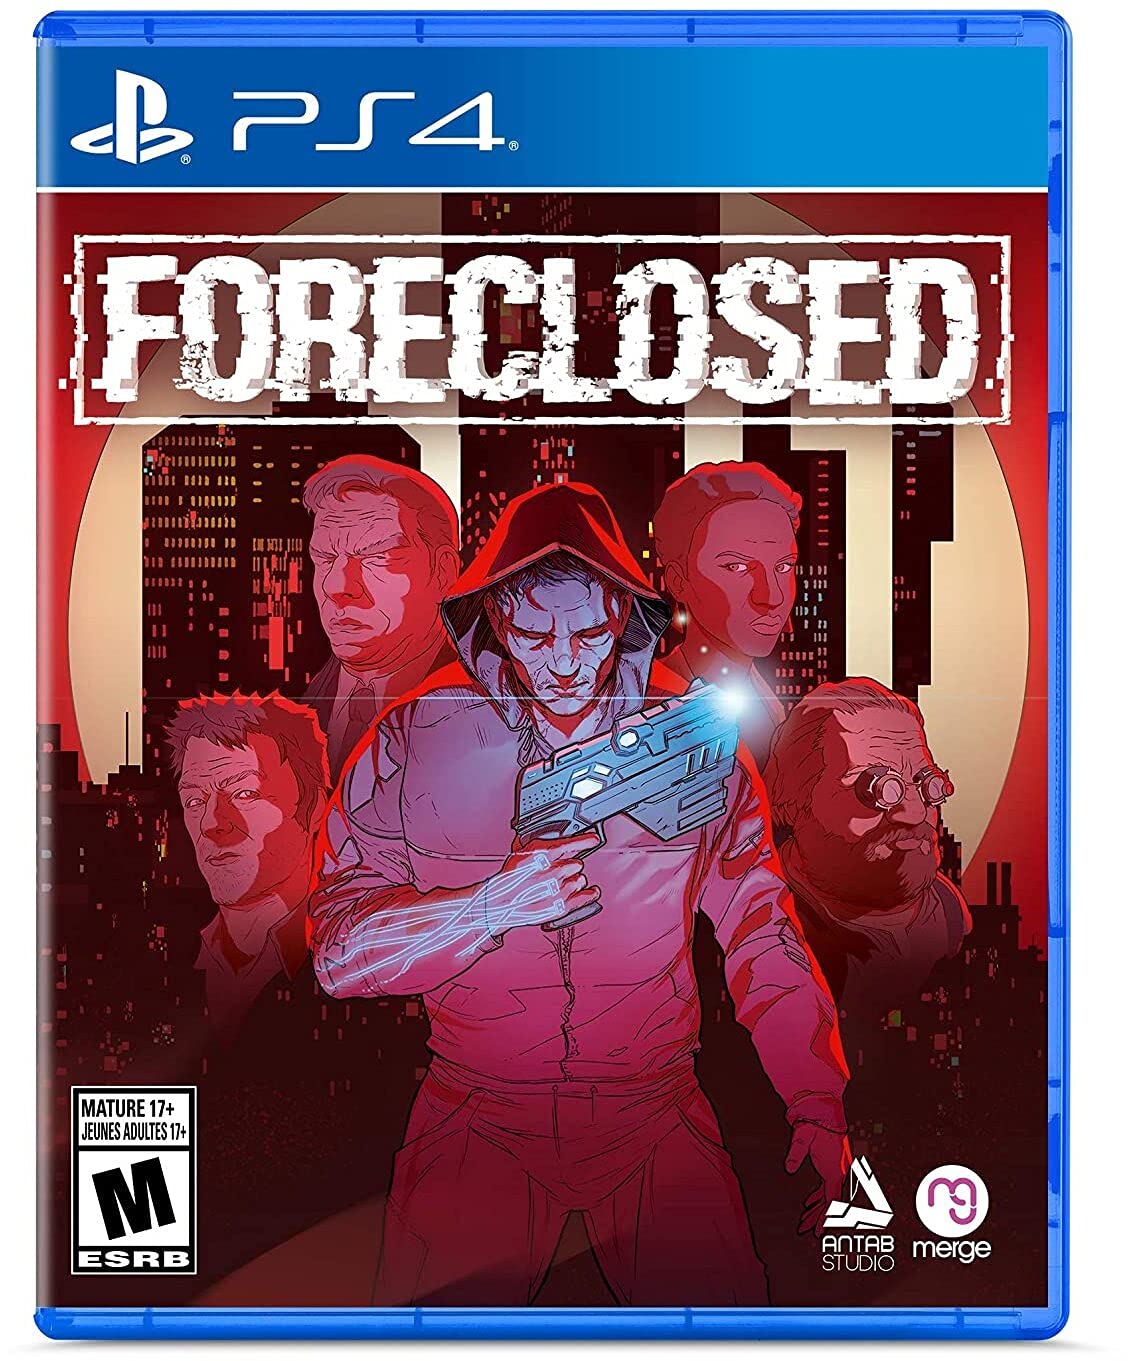 Foreclosed (PS4)